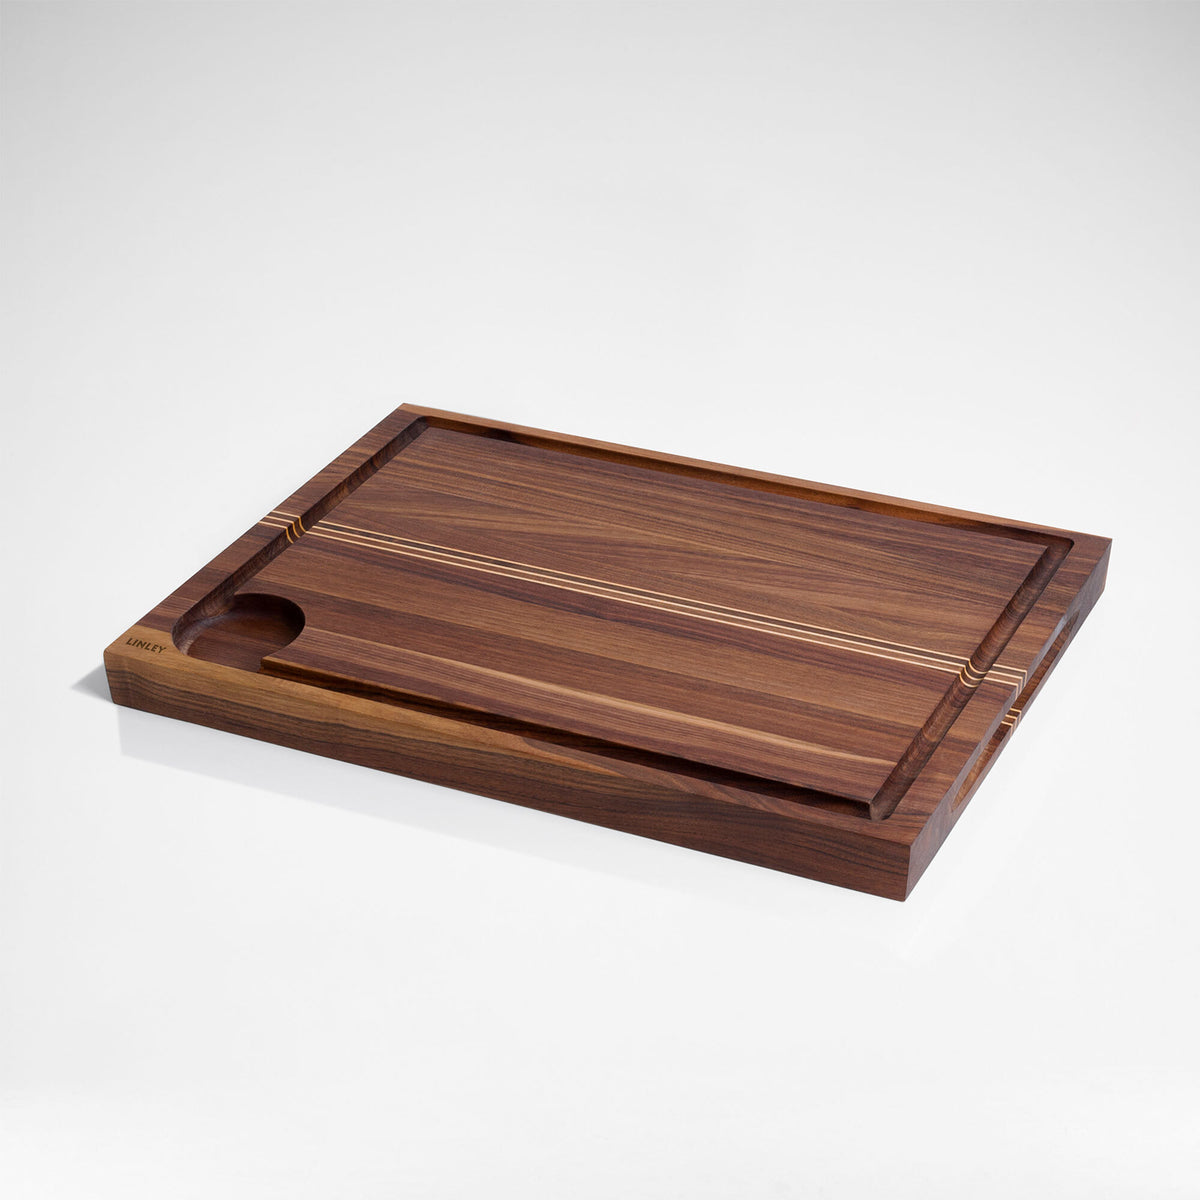 LINLEY Cuisine Chopping Board | Luxury Home Accessories & Gifts | LINLEY